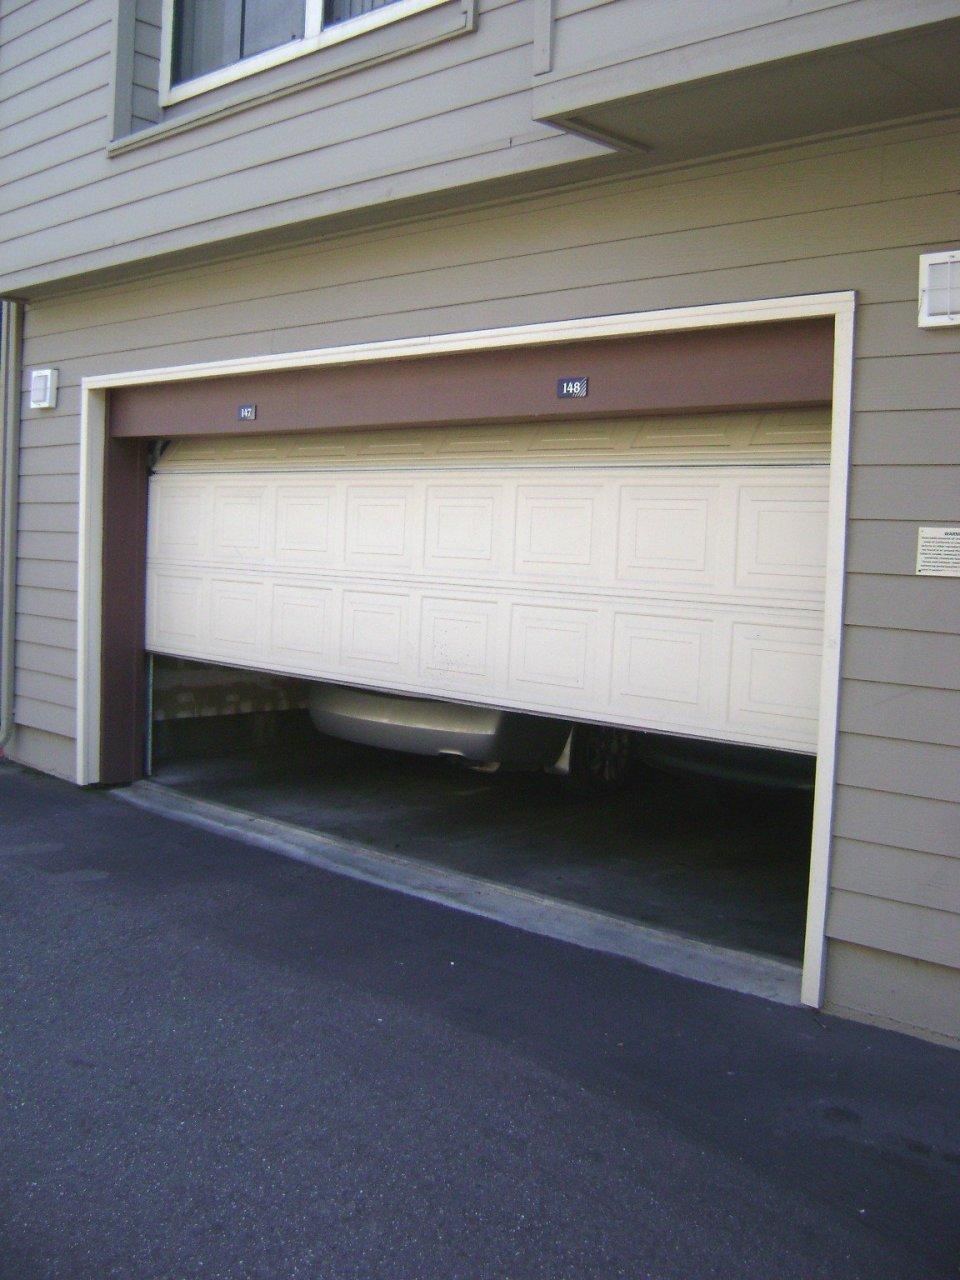 My Chamberlain Garage Door Won’t Close – Common Causes and Solutions